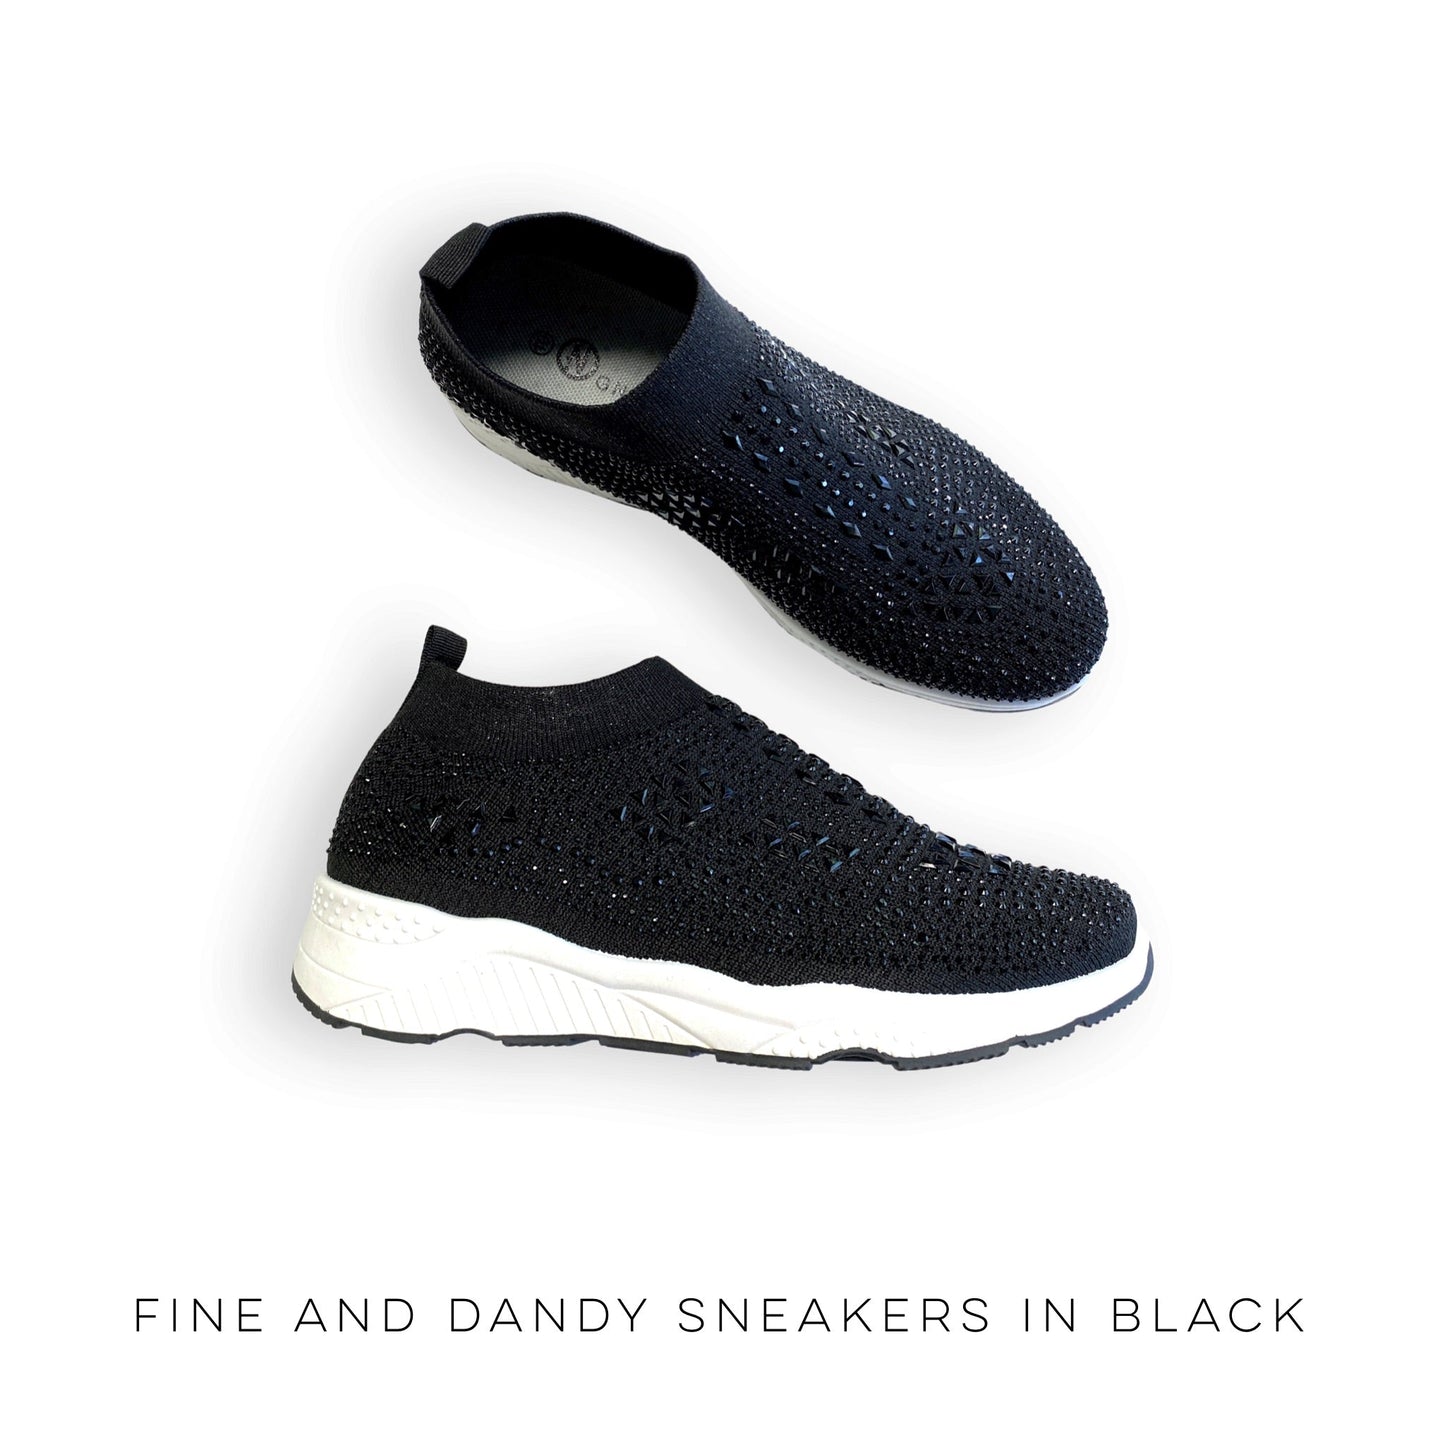 Fine and Dandy Sneakers in Black